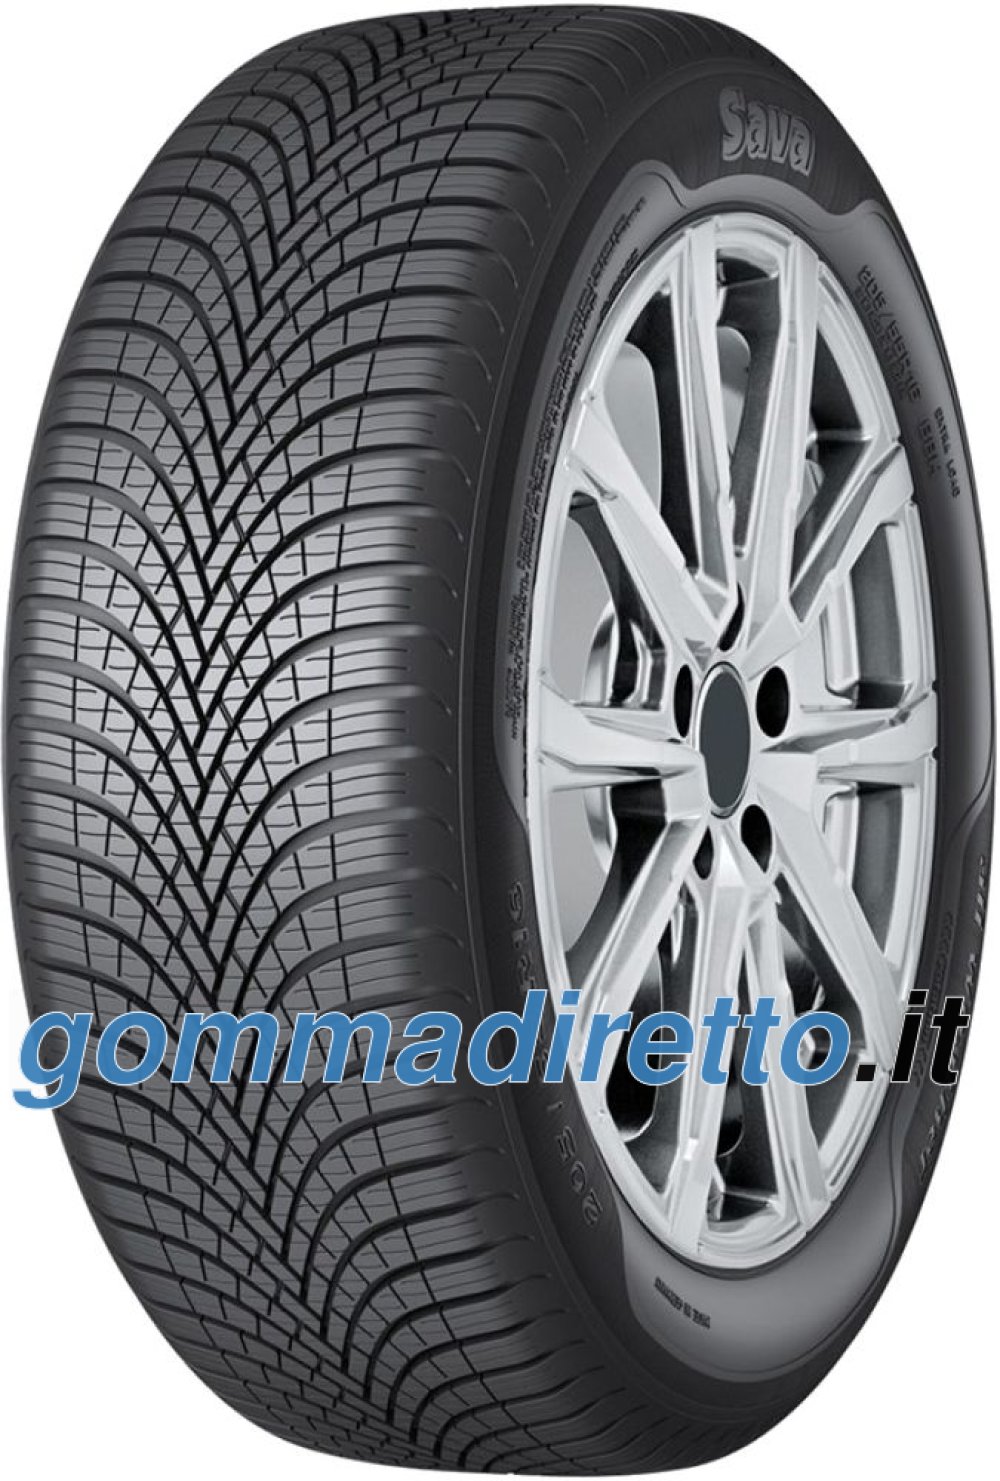 Image of Sava All Weather ( 215/55 R17 98V XL )